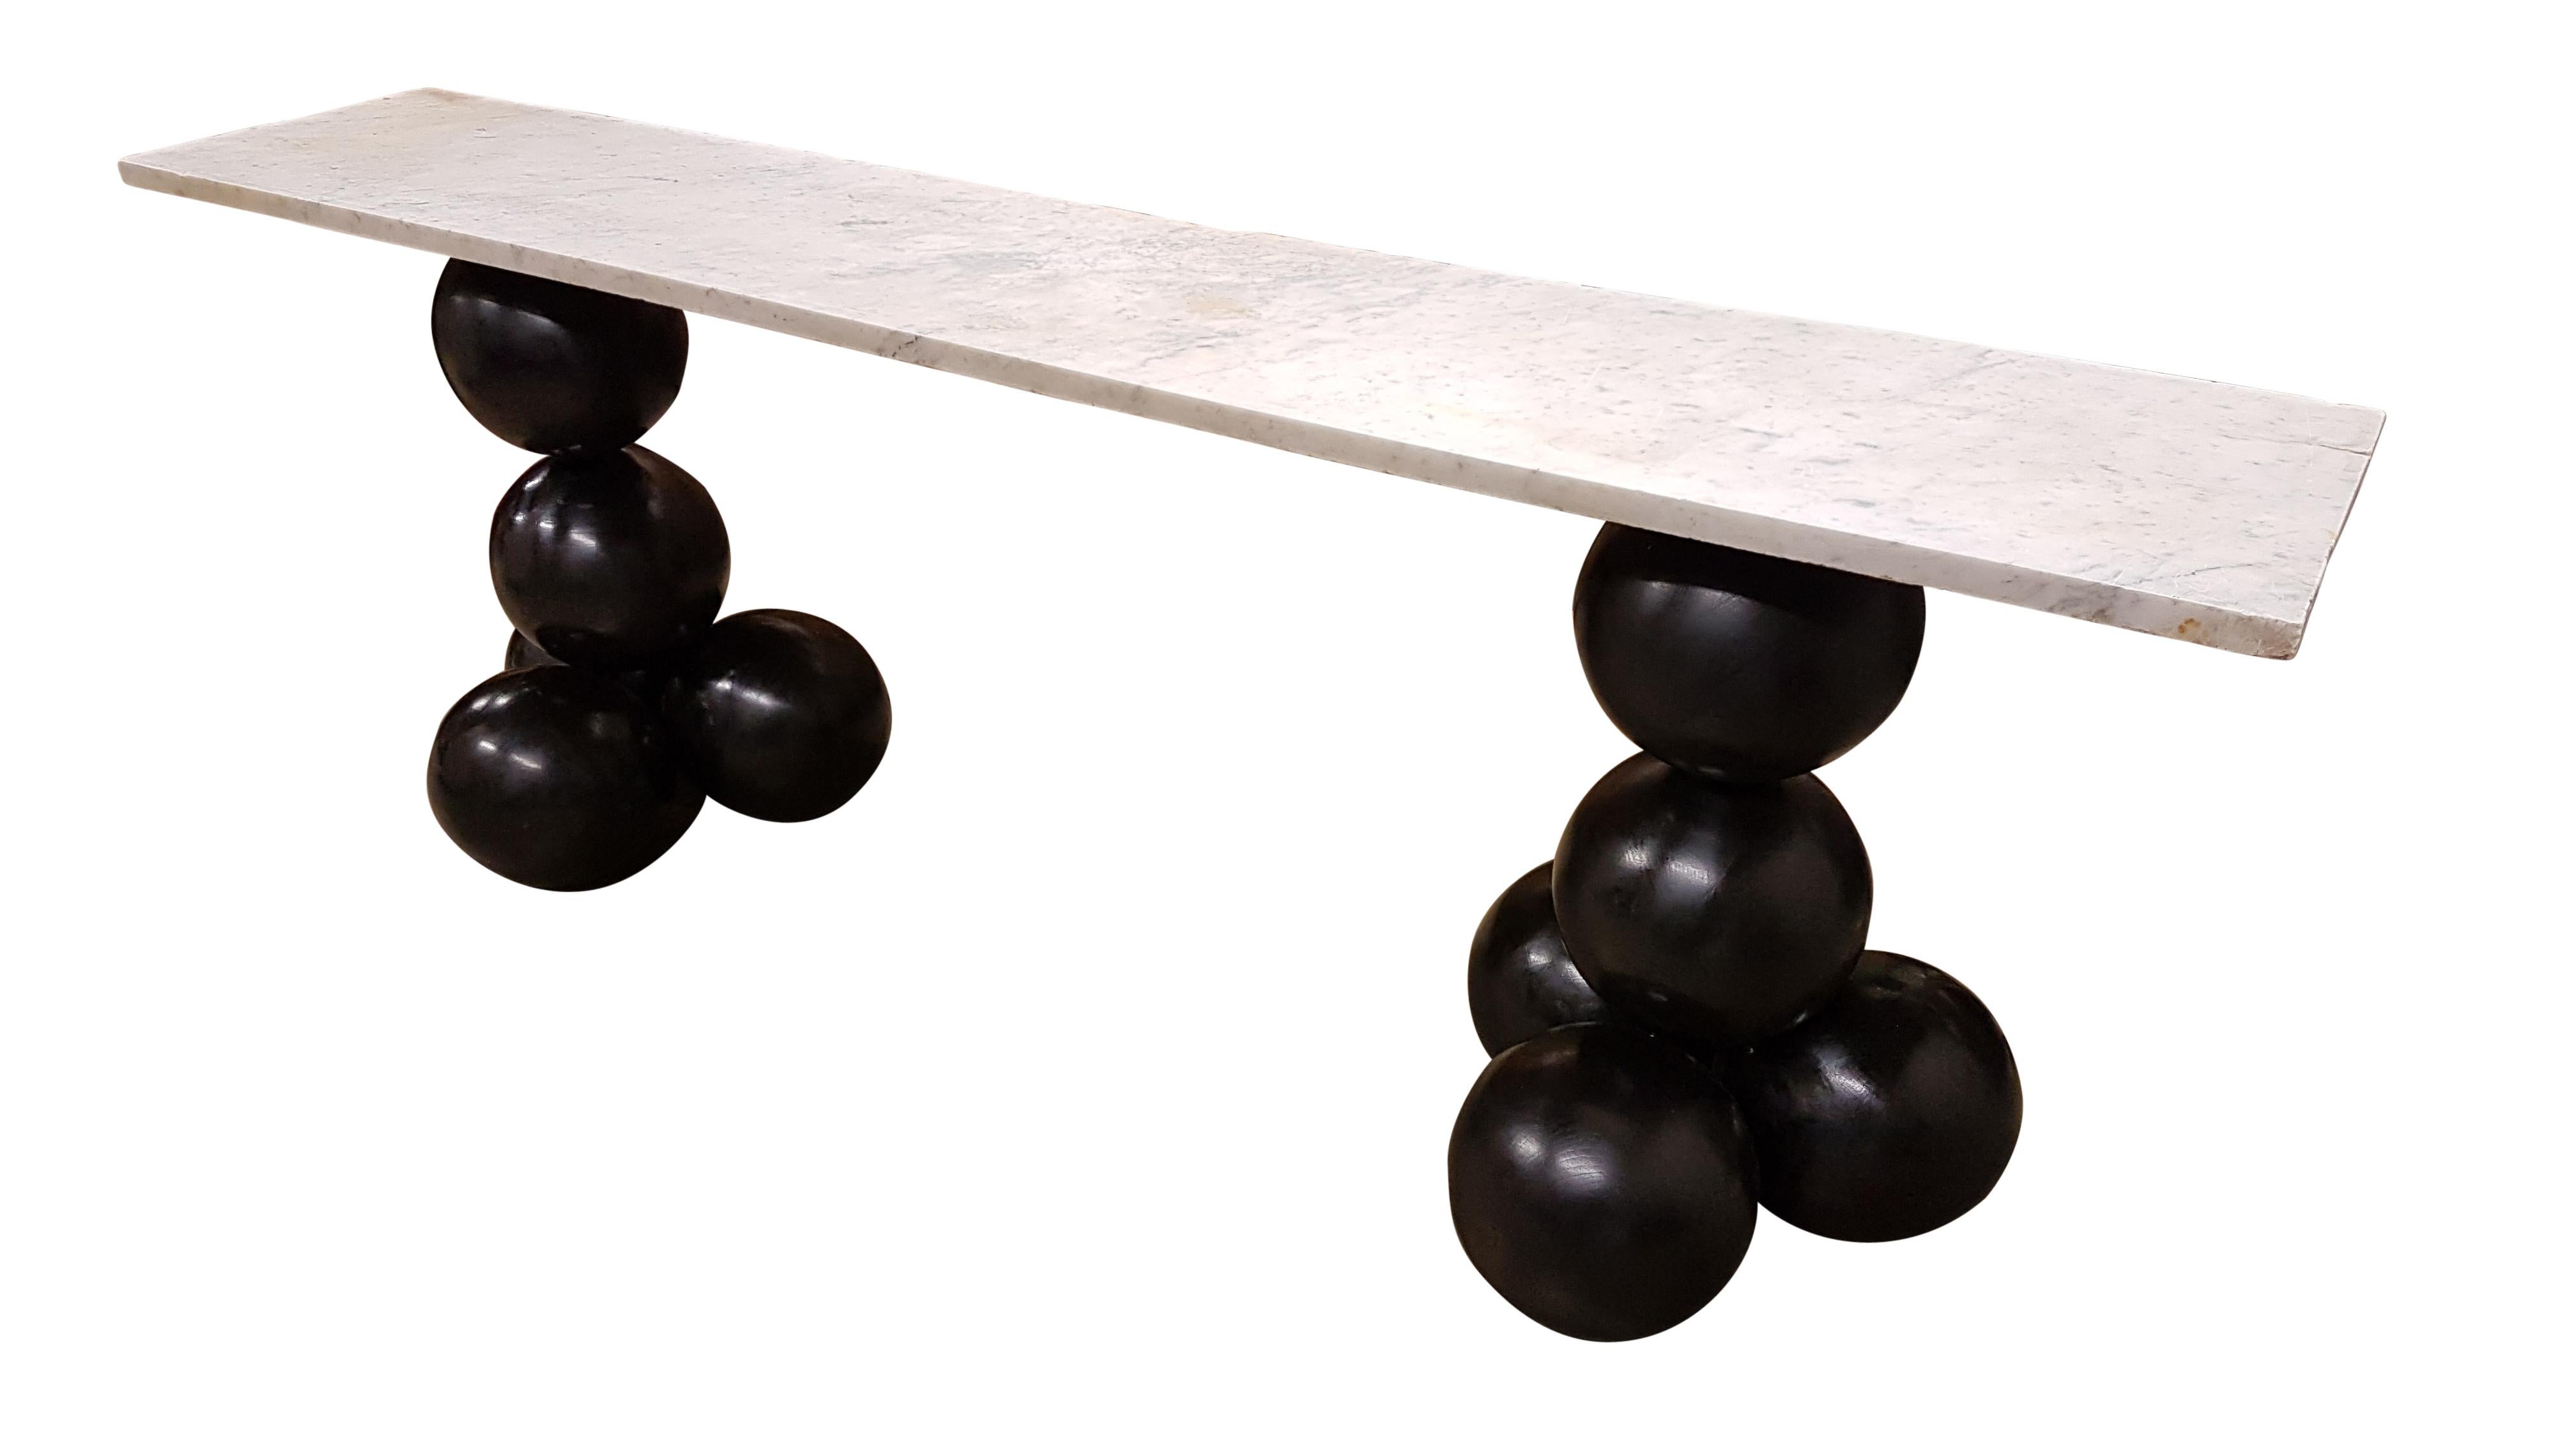 A beautiful and decorative custom console table. The bases are bulbous constructed from 10 25cm diameter wooden balls all jointed together and then ebonized.
We sourced a 25mm thick antique Carrara marble slab that has a very nice weathered finish,